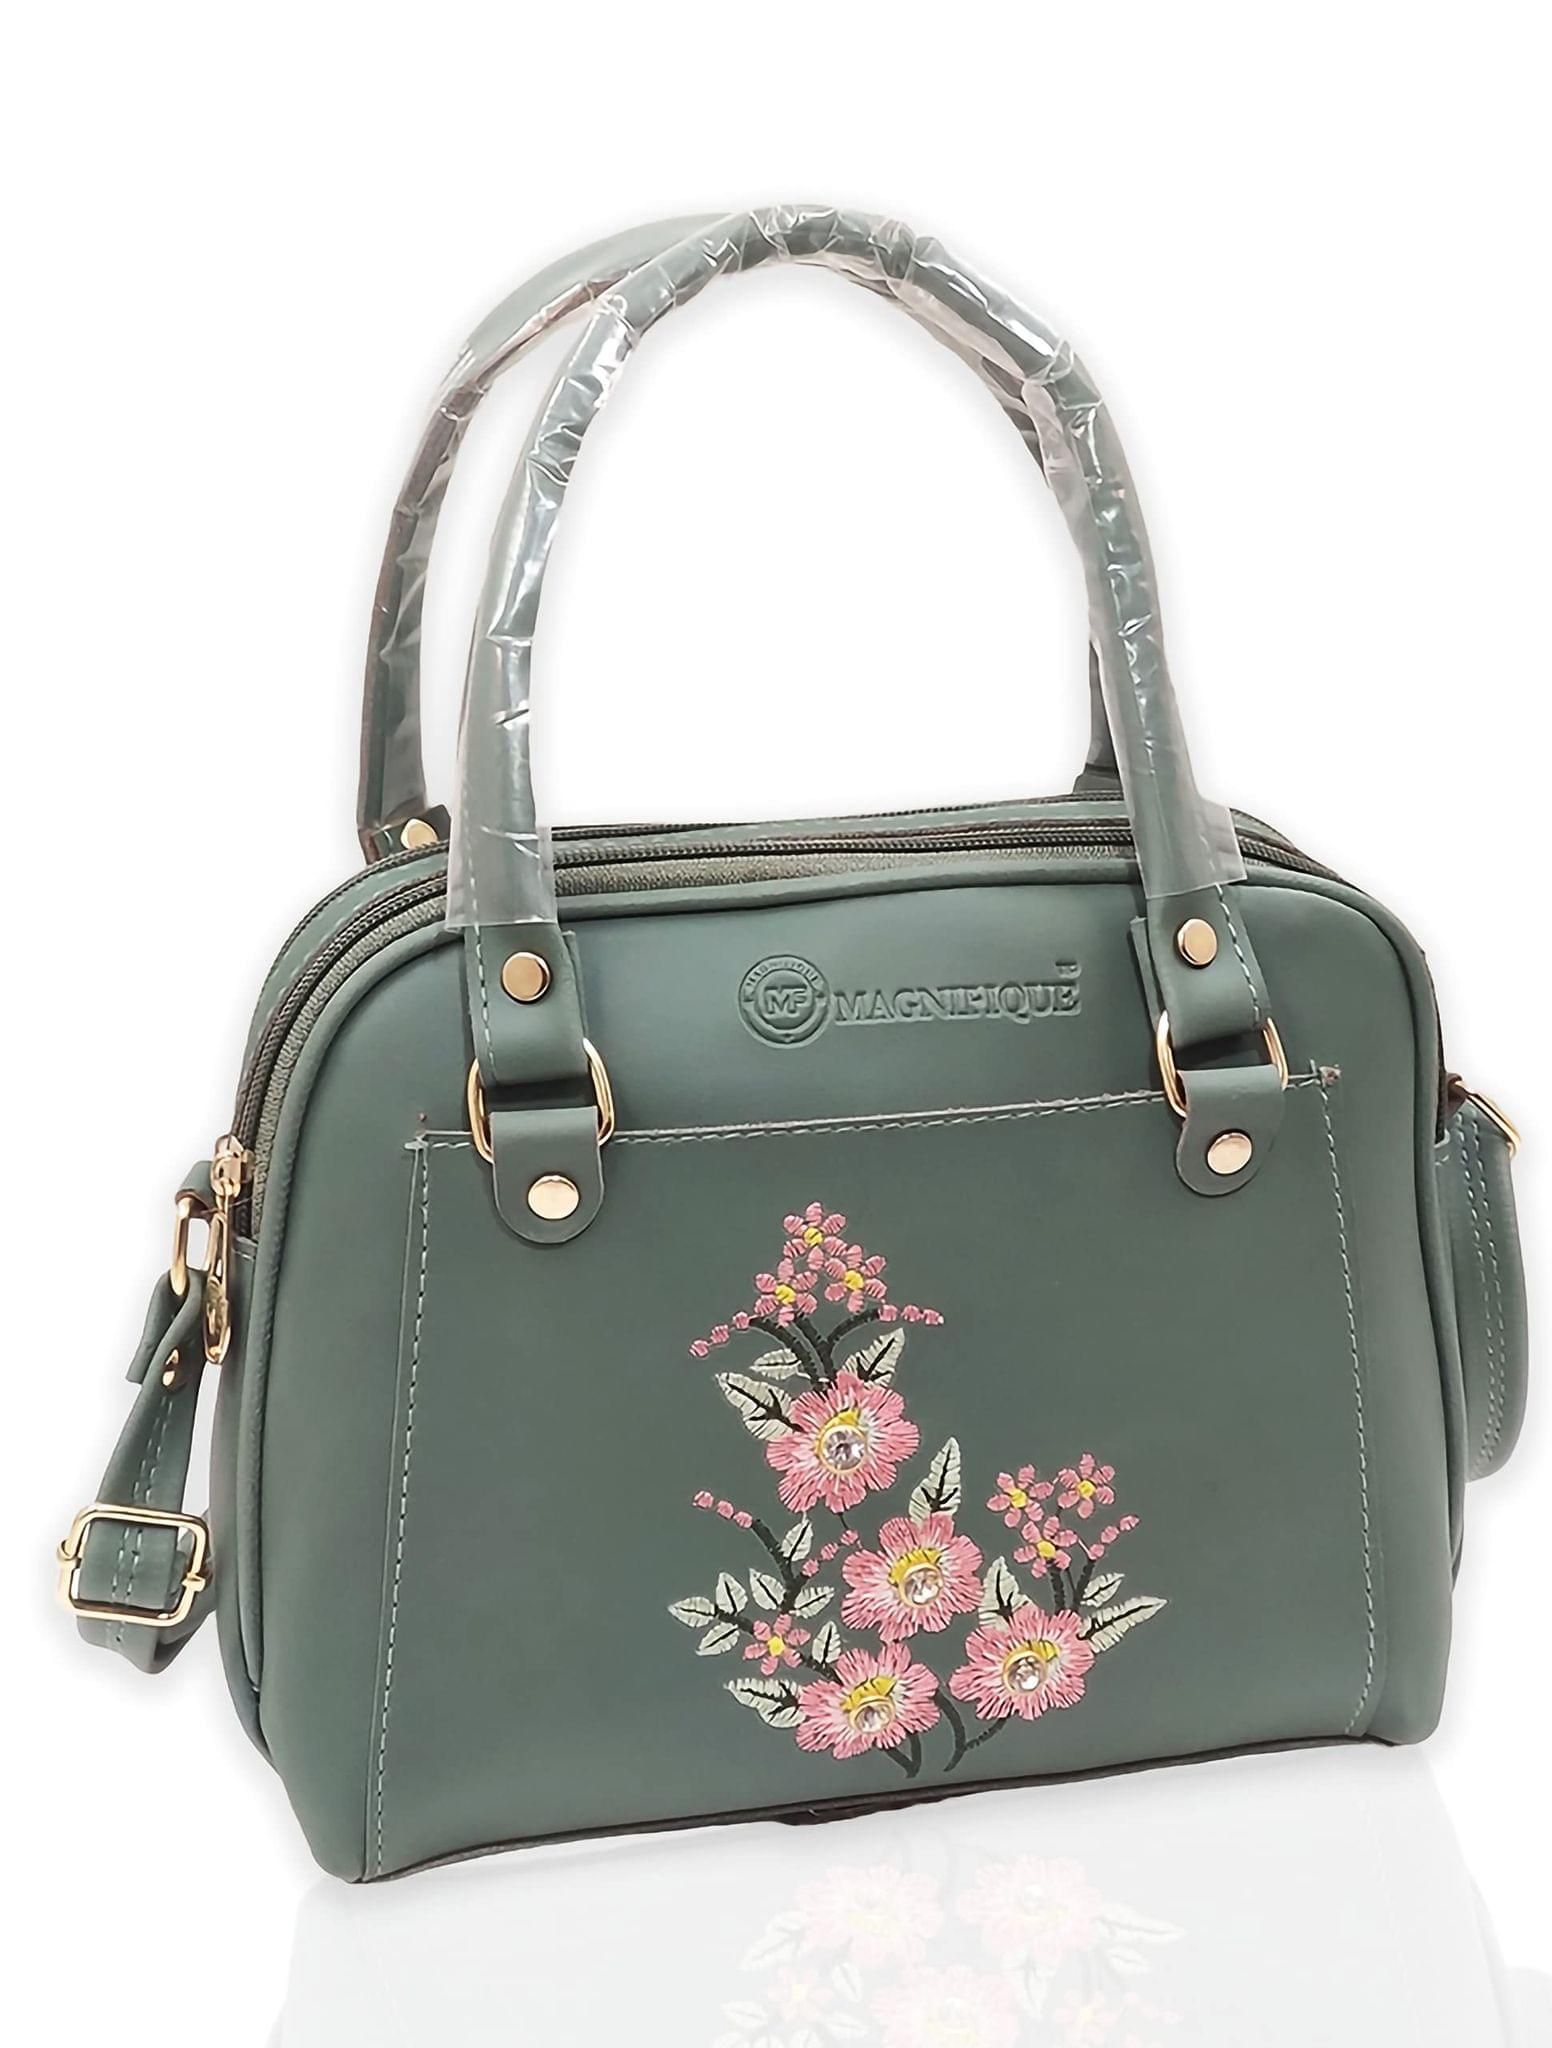 Buy Handbags For Women At Lowest Prices Online In India | Tata CLiQ